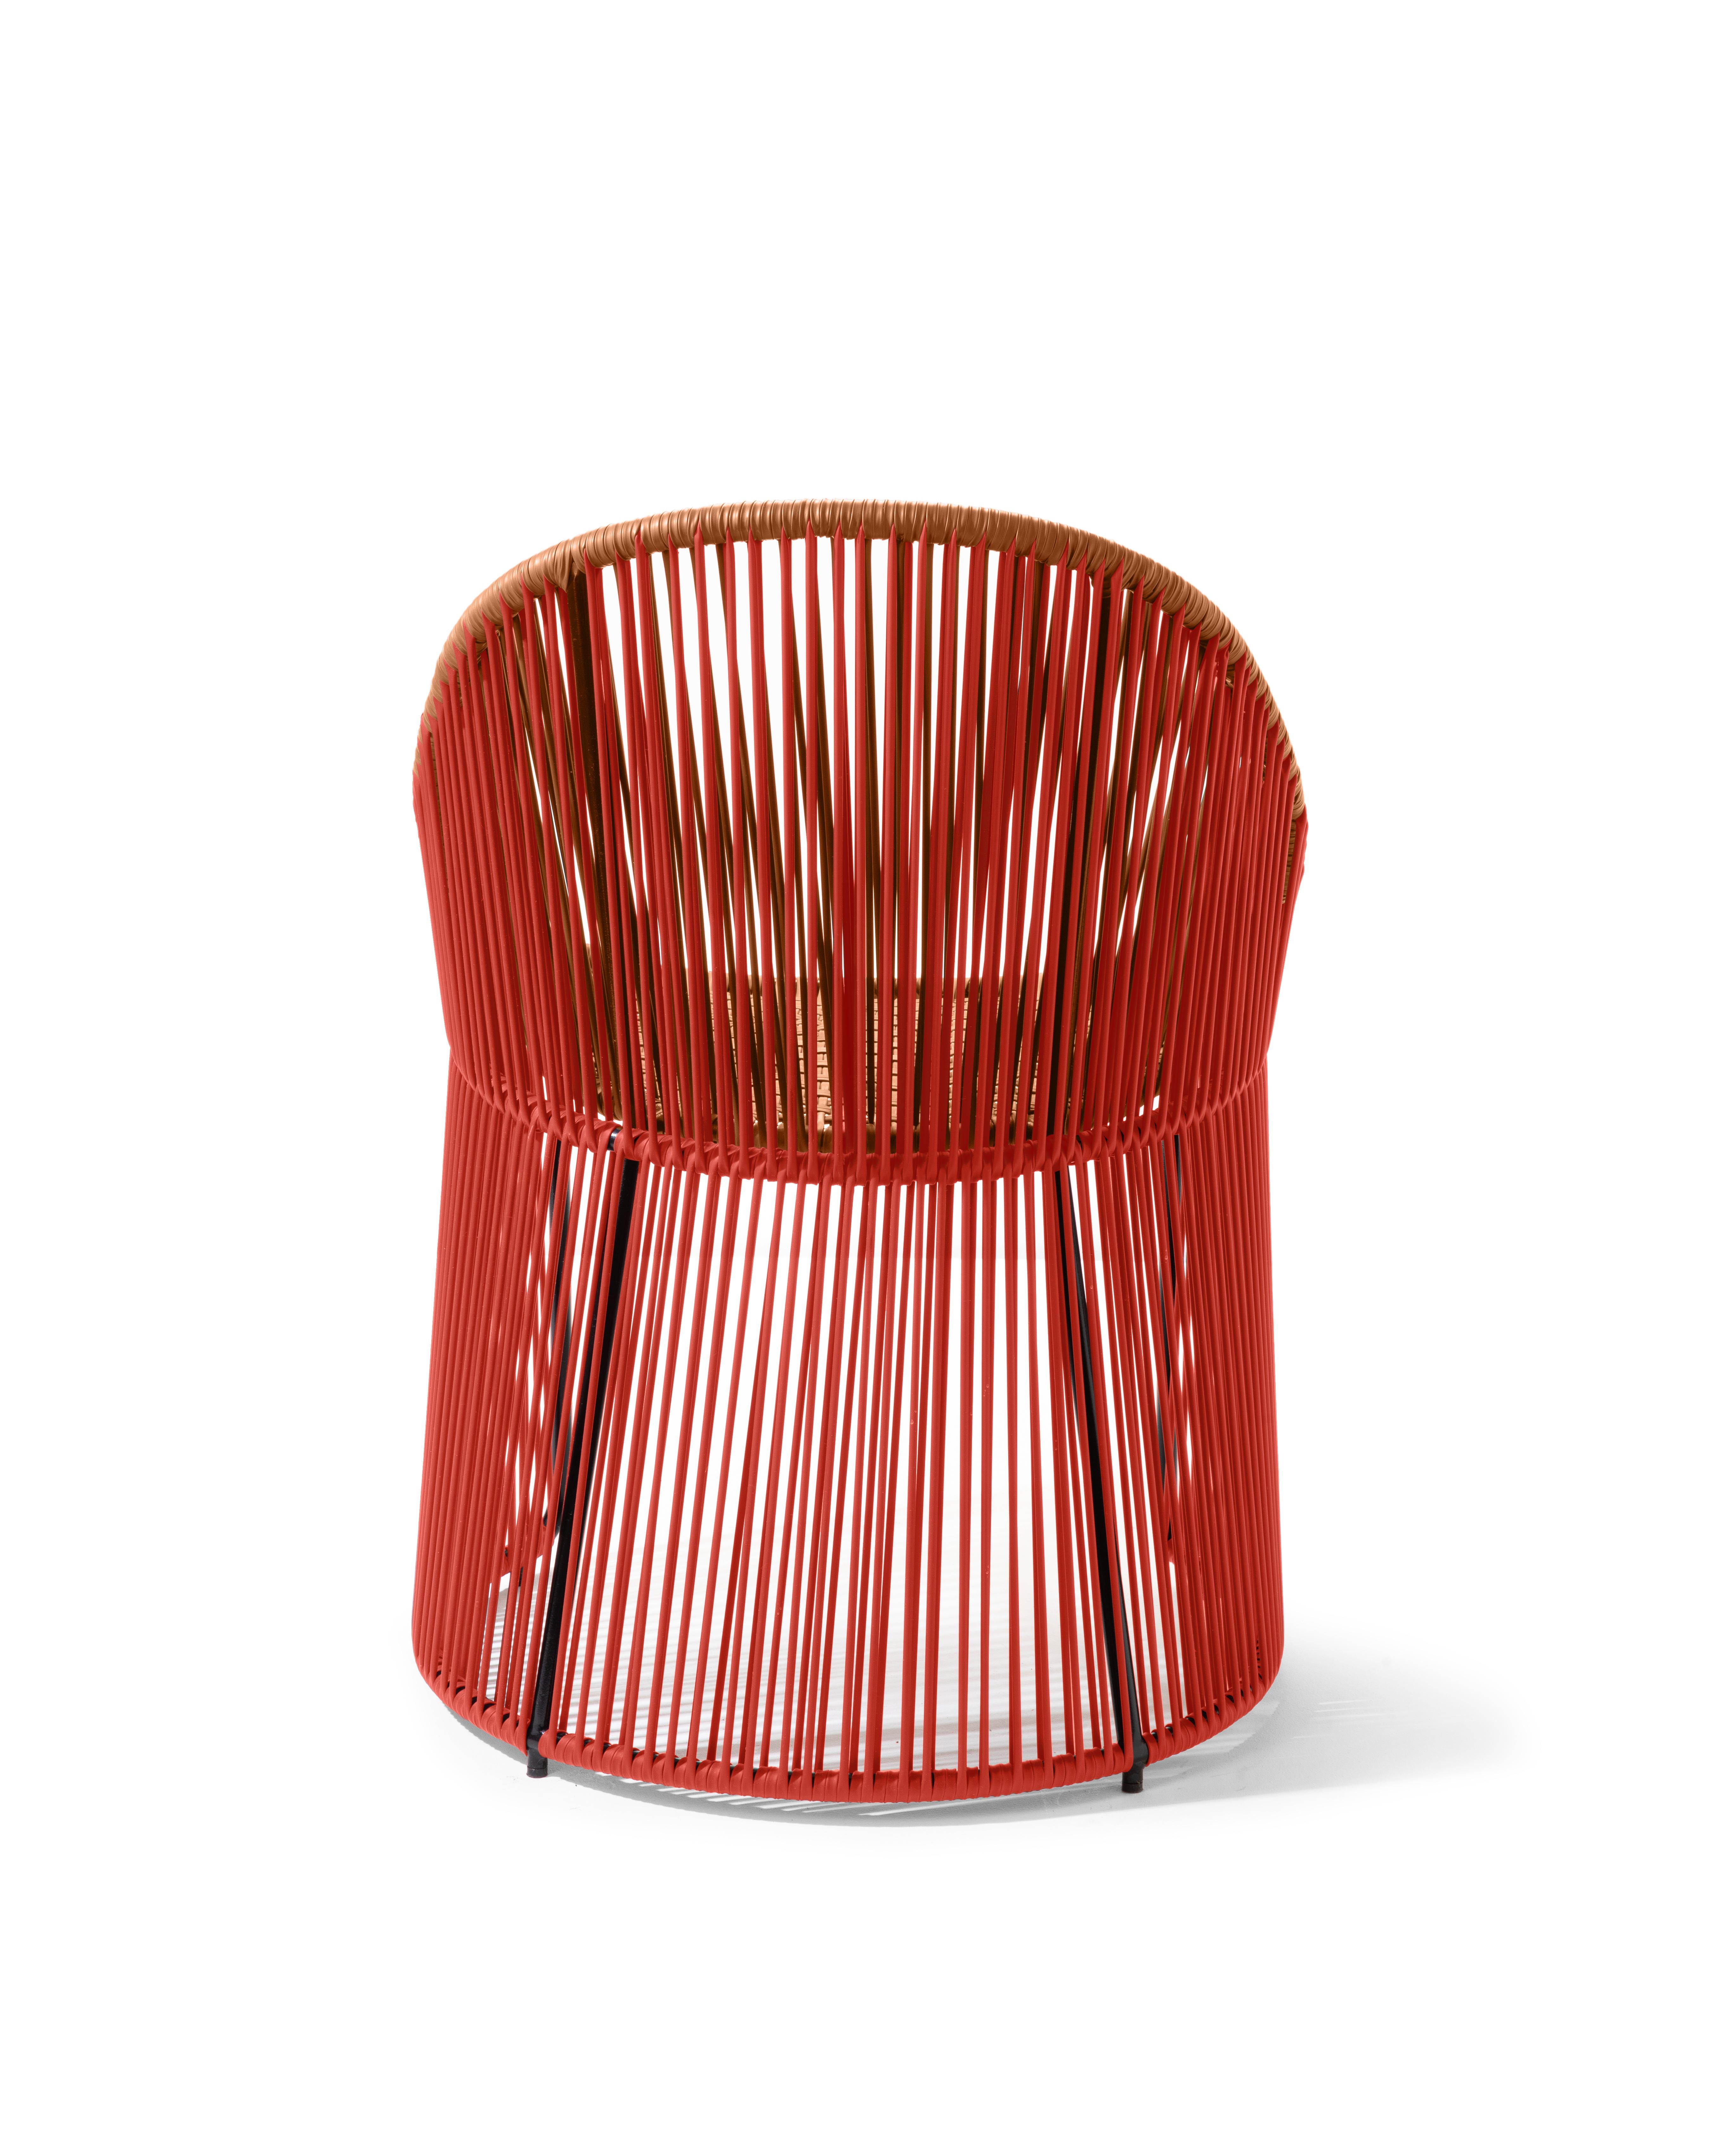 Powder-Coated Coral Cartagenas Dining Chair by Sebastian Herkner For Sale